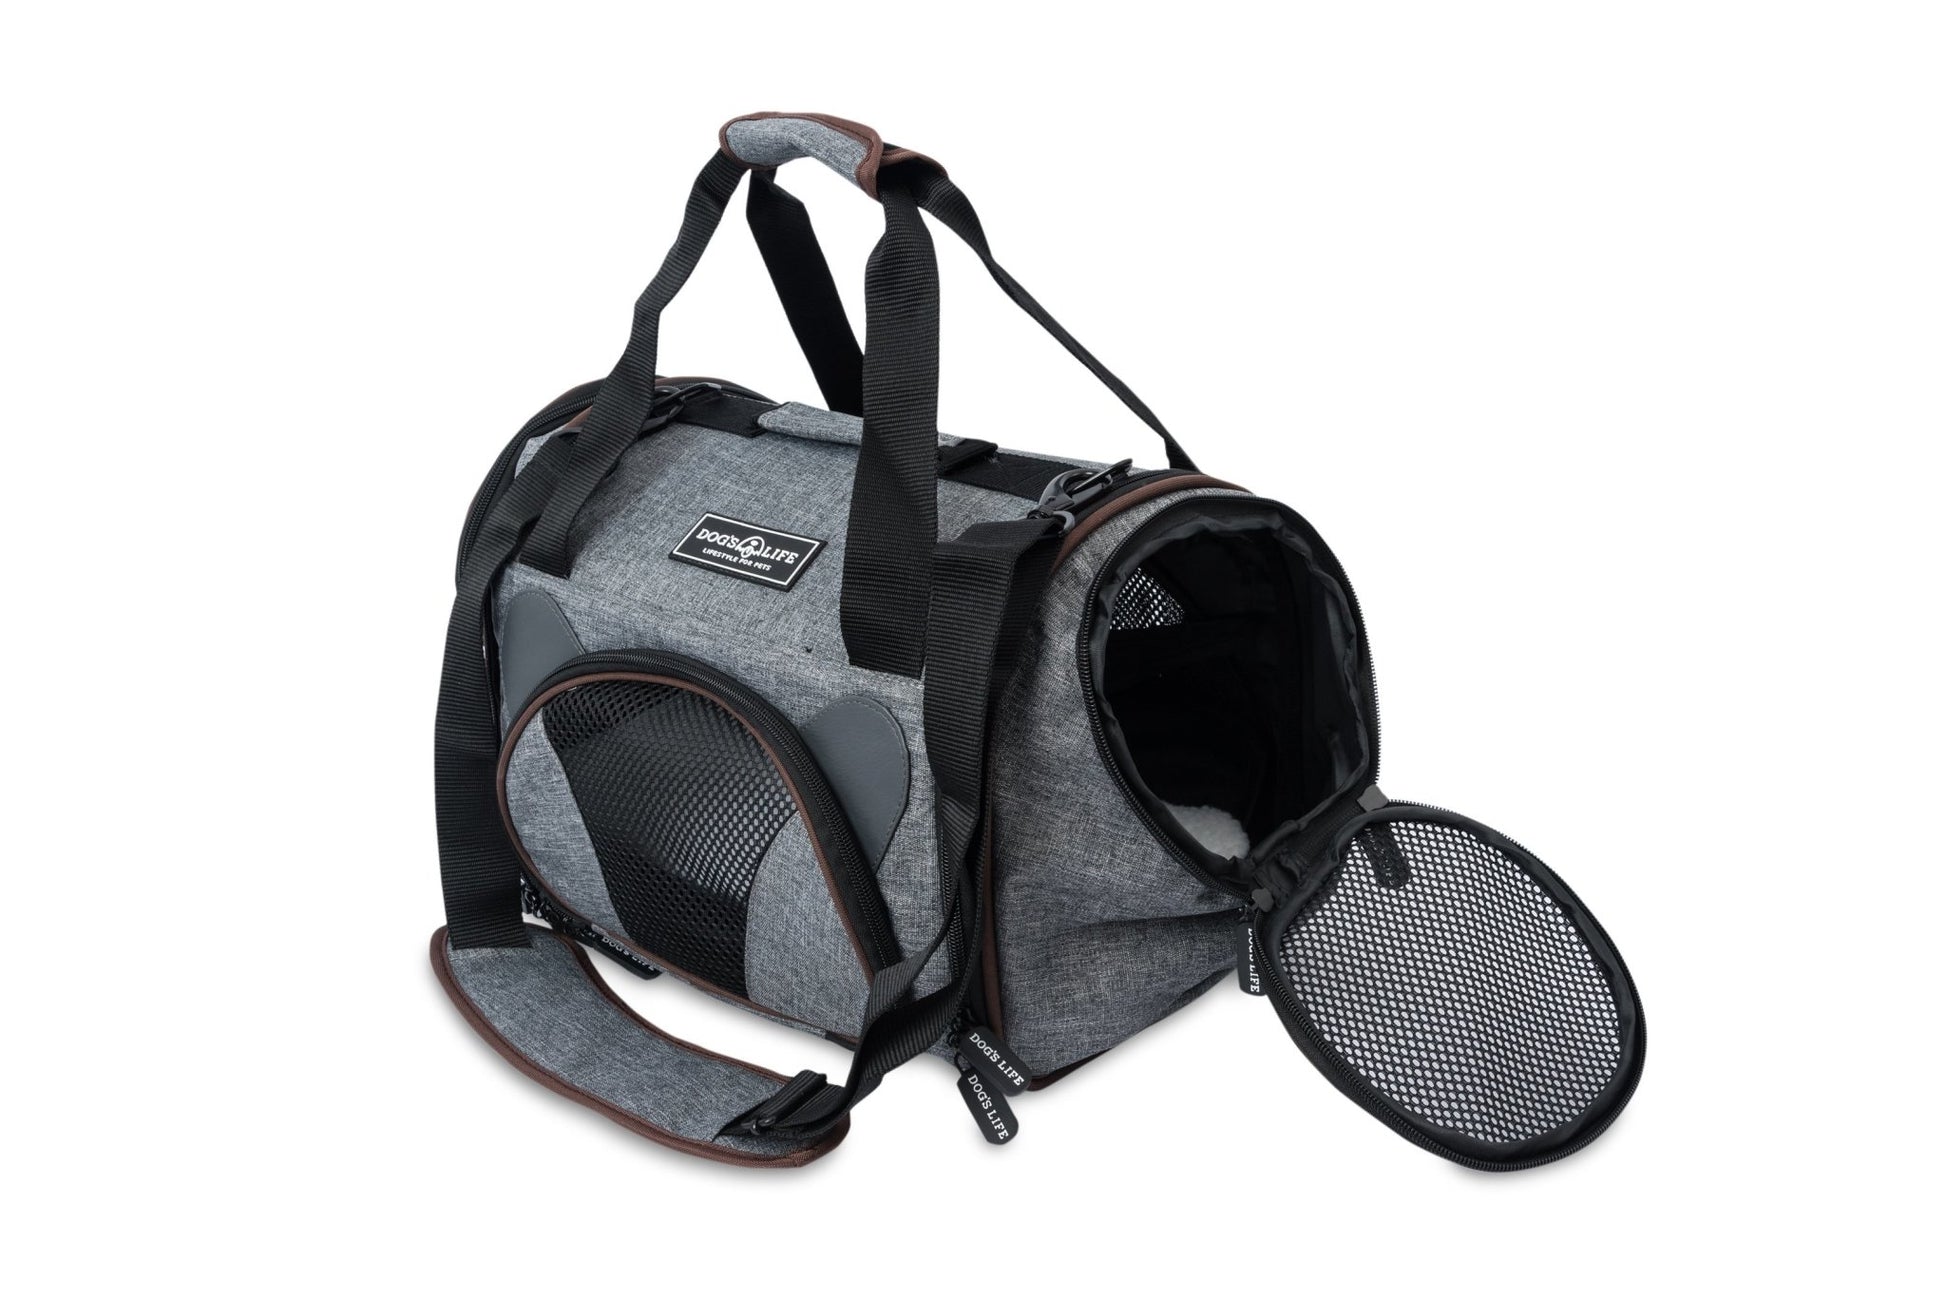 Dog's Life Teddy Park Pet Carrier - Carriers